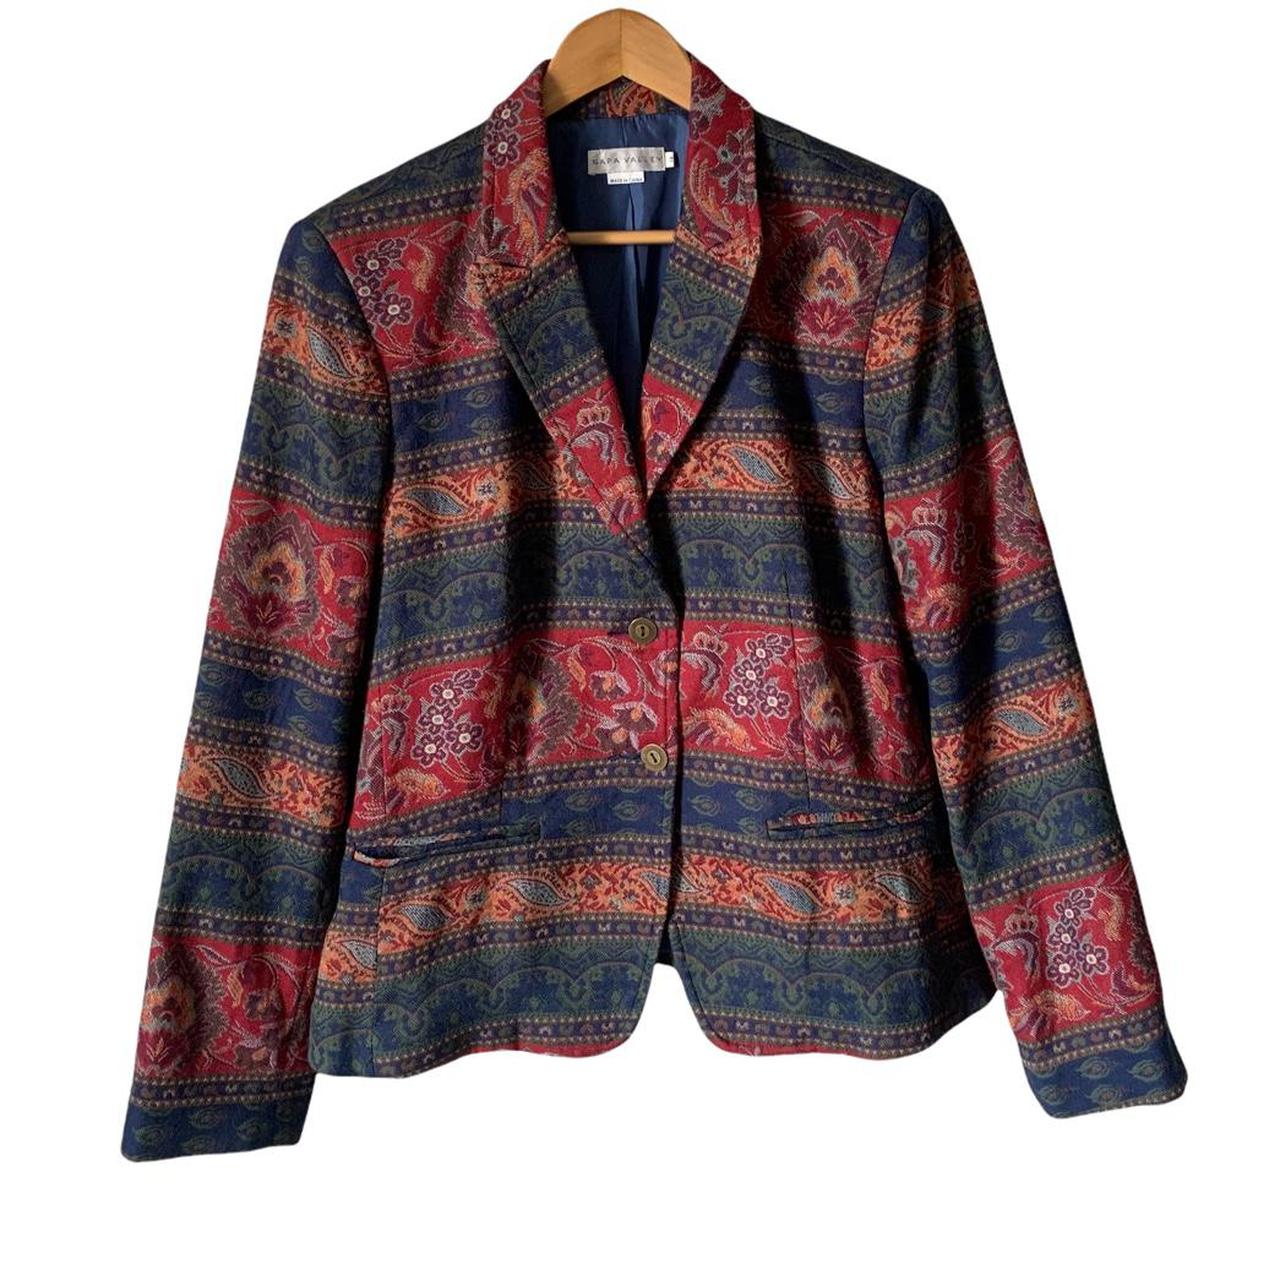 Women's Red and Blue Jacket